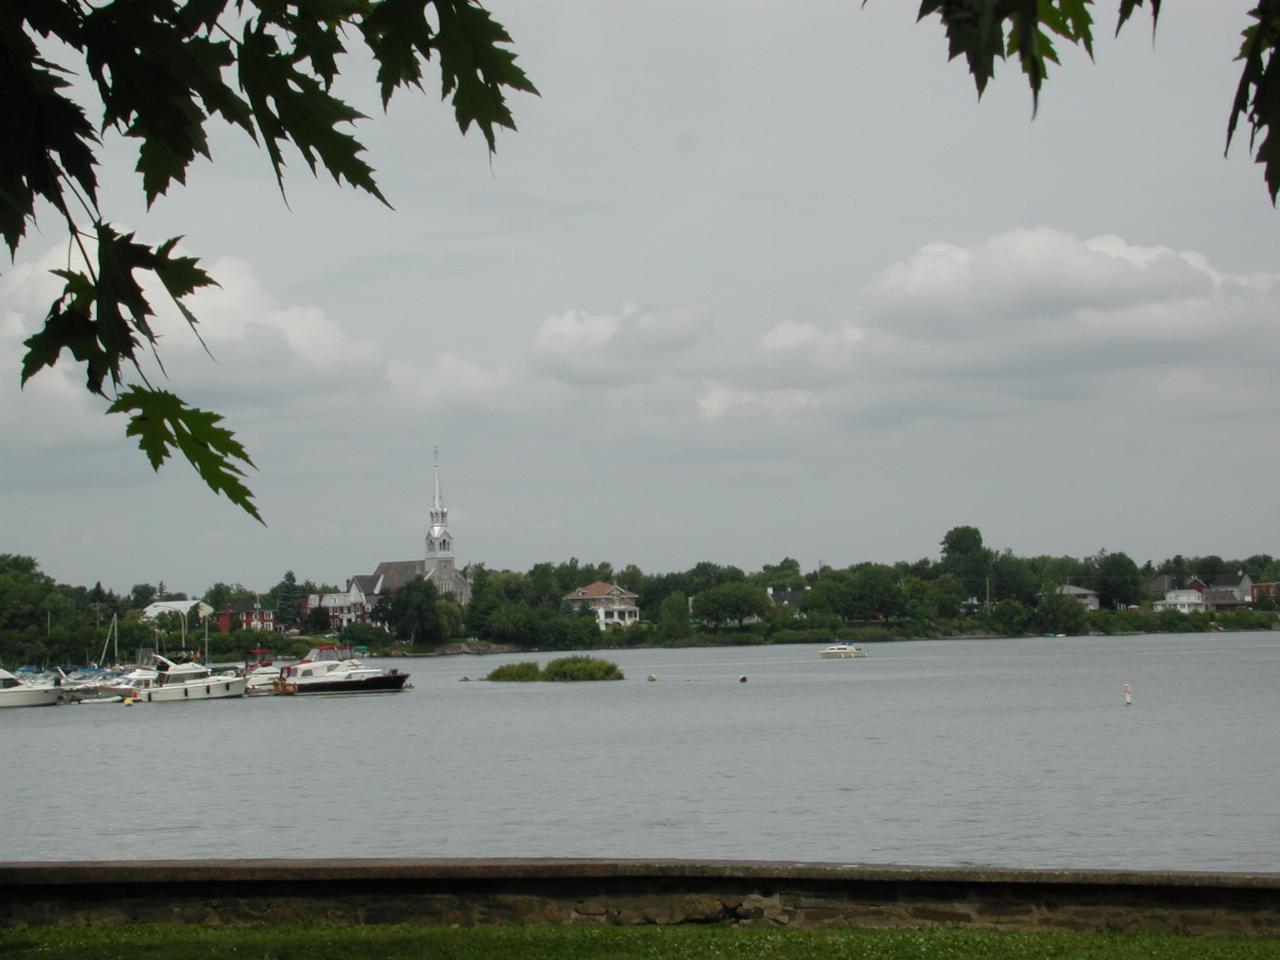 The bay adjacent to Fort Chambly, showing the church steeple in the town of Fort Chambly